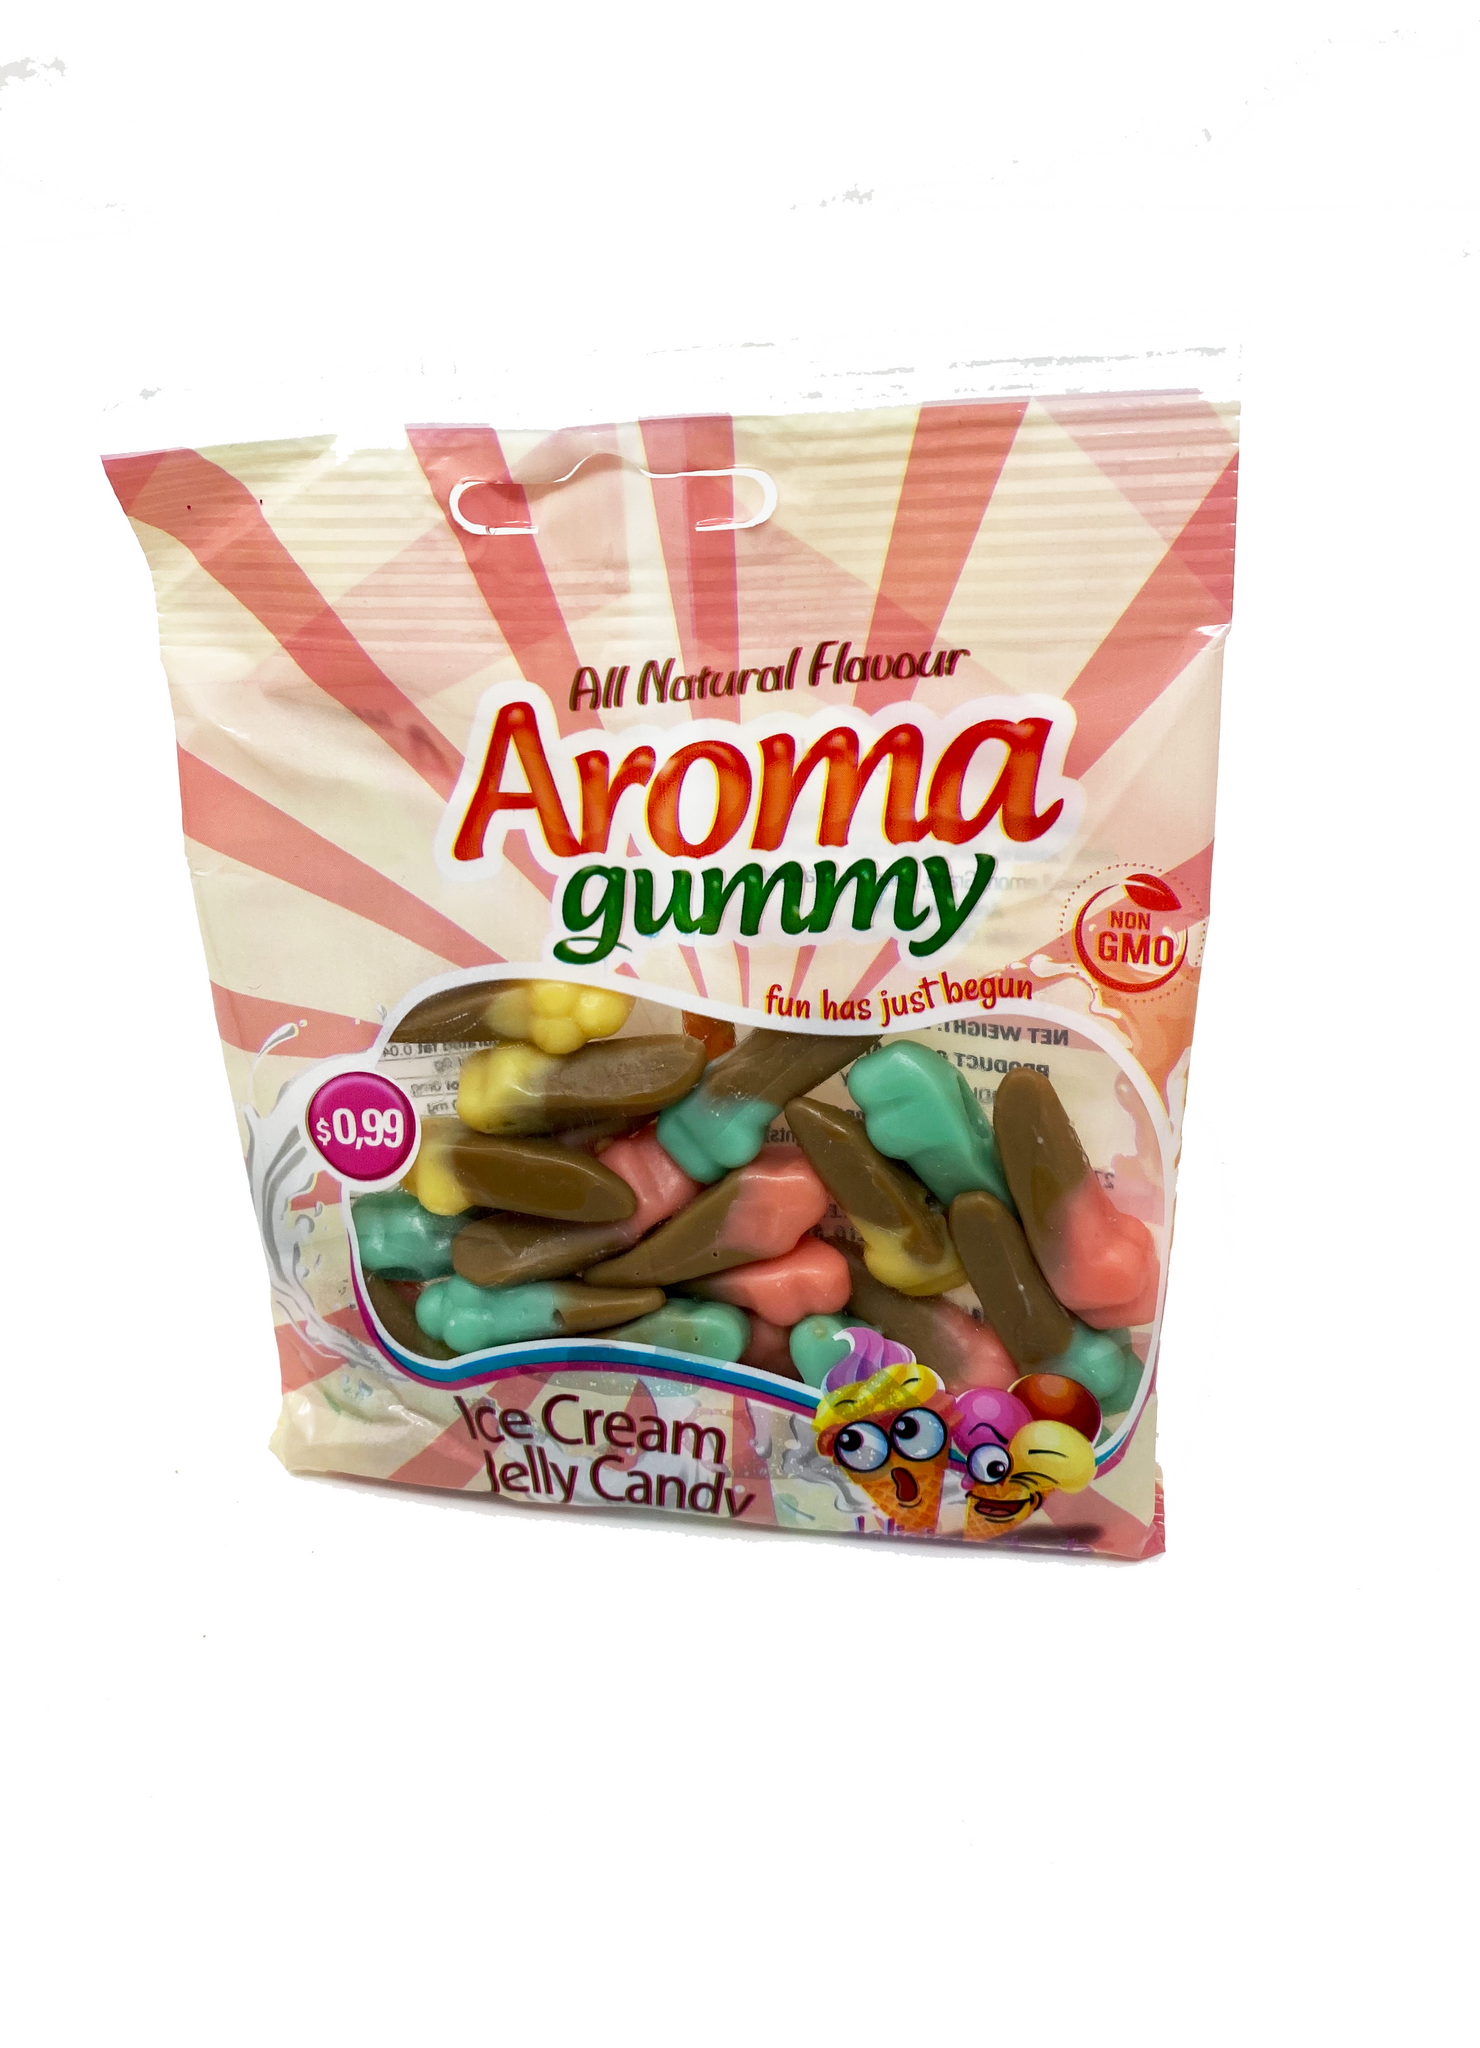 Ice Cream flavored Aroma Gummy (3x80g) - Imported Halal Candy